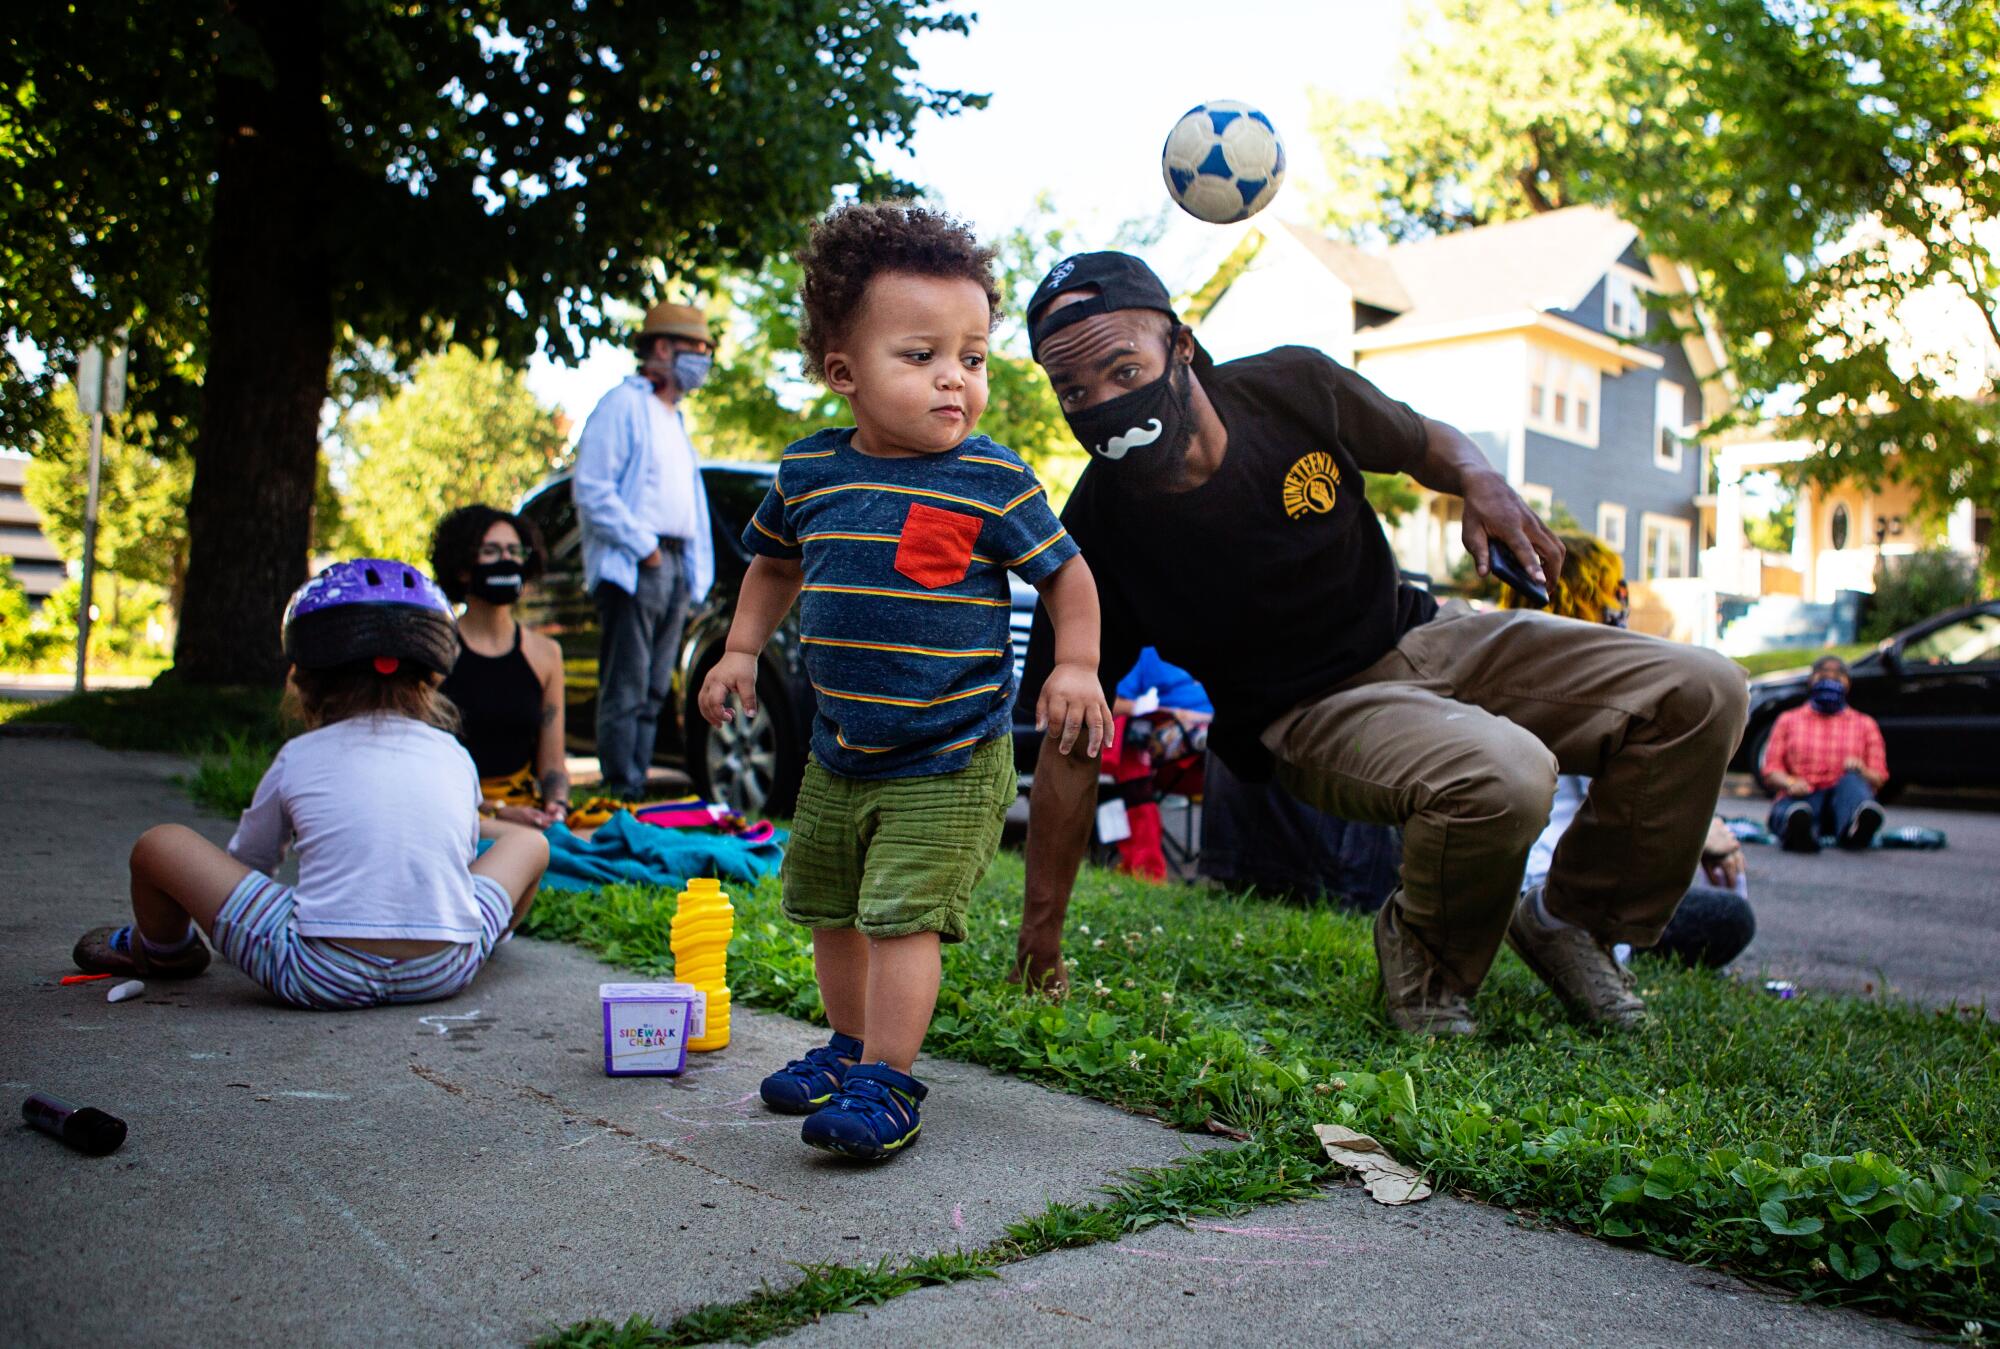 A toddler plays with a ball as his father watches at a community gathering led by Alicia Smith in Minneapolis